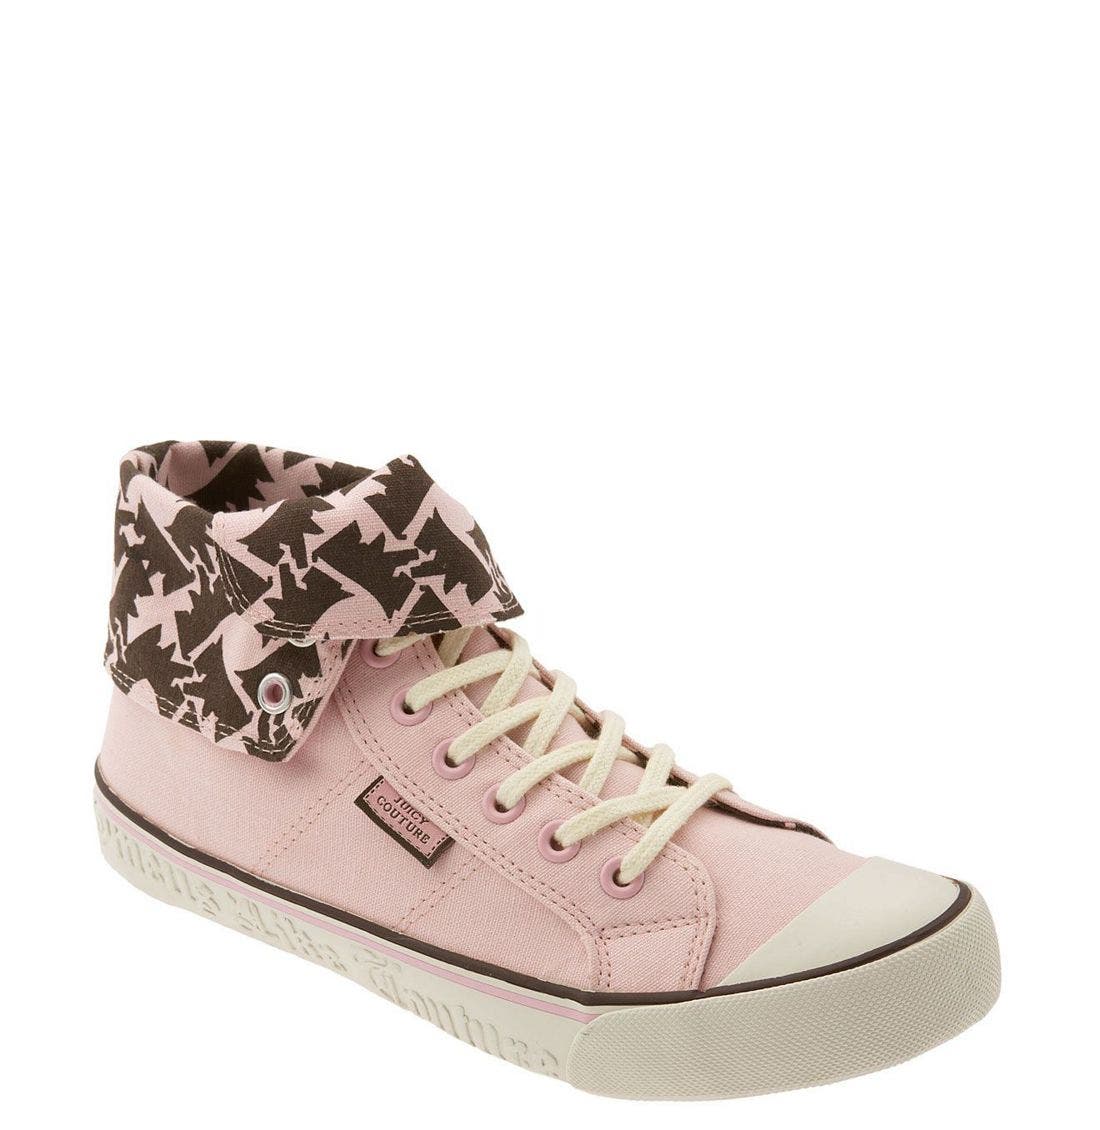 juicy couture high top sneakers